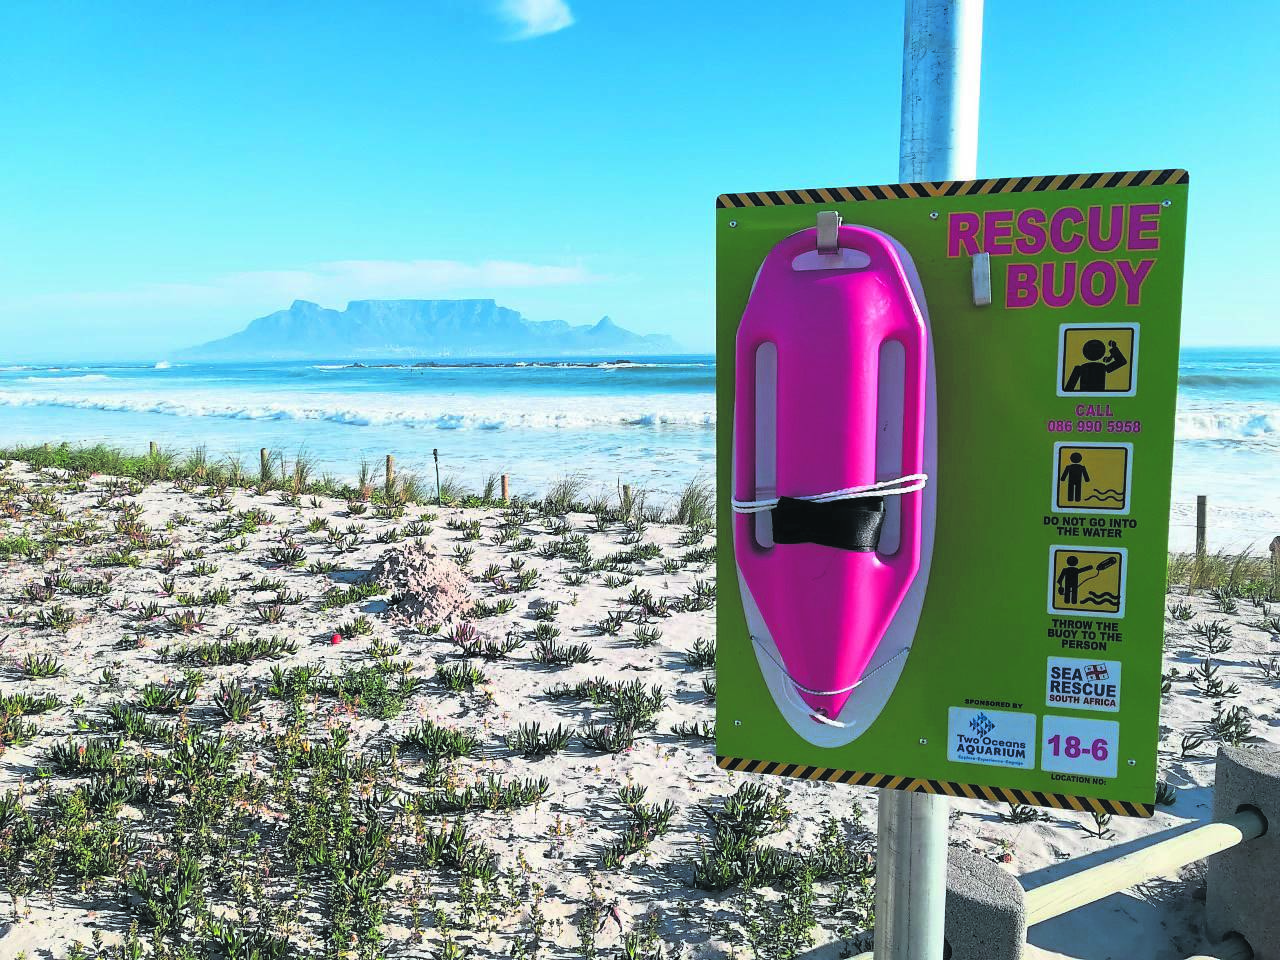 The pink rescue buoys are public rescue equipment deployed at selected beaches, rivers and dams across South Africa.PHOTO: NSRI